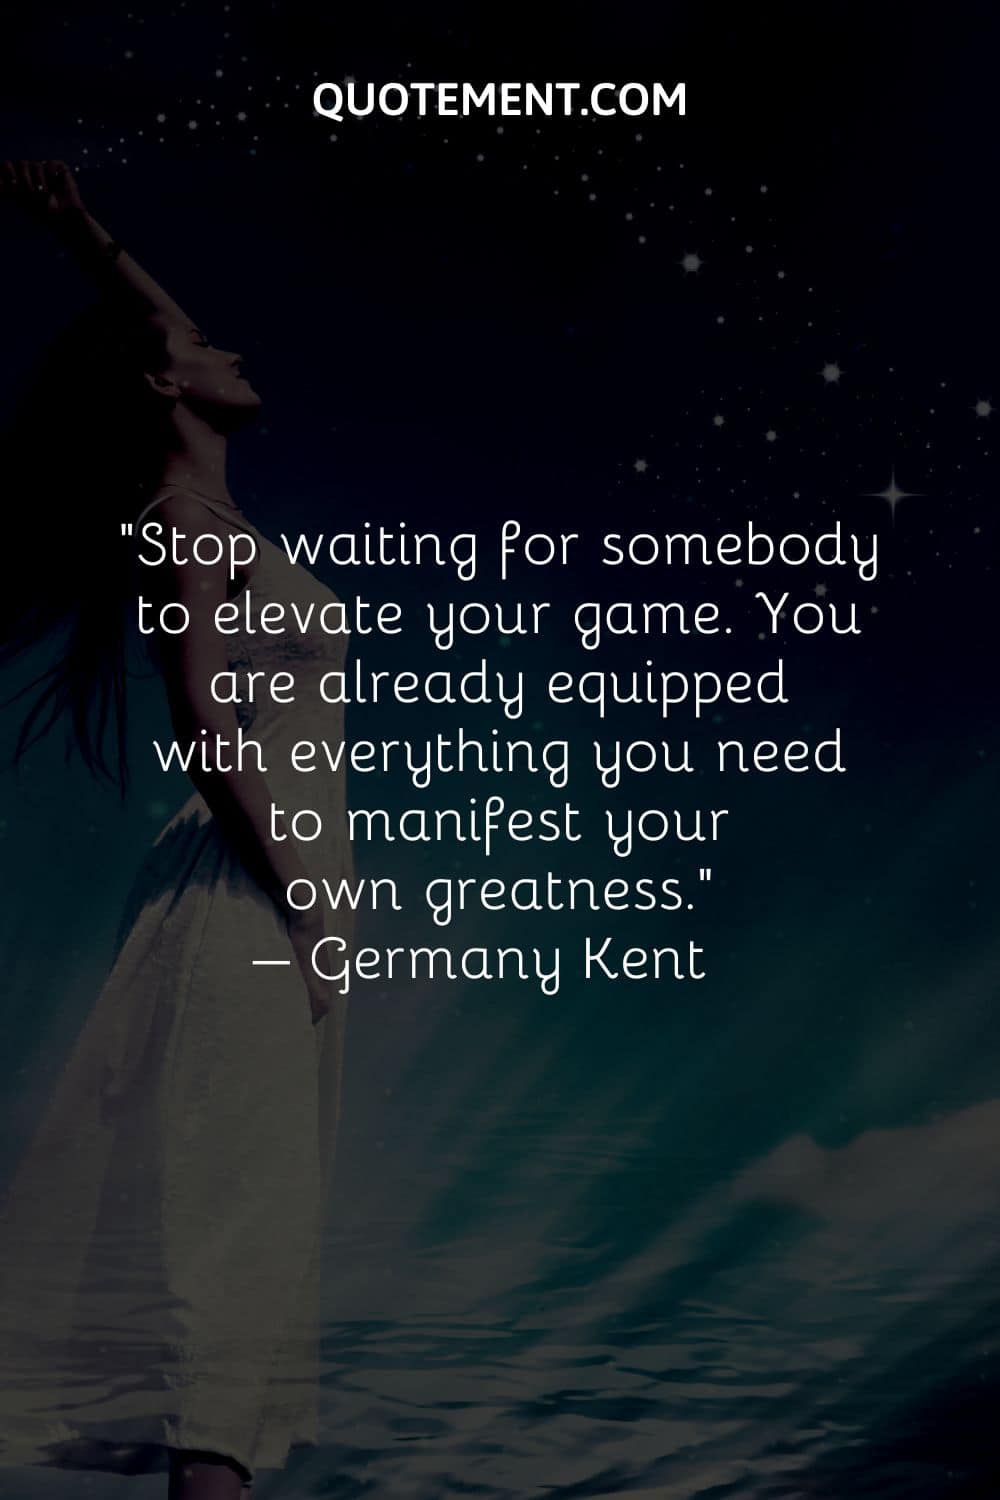 Stop waiting for somebody to elevate your game